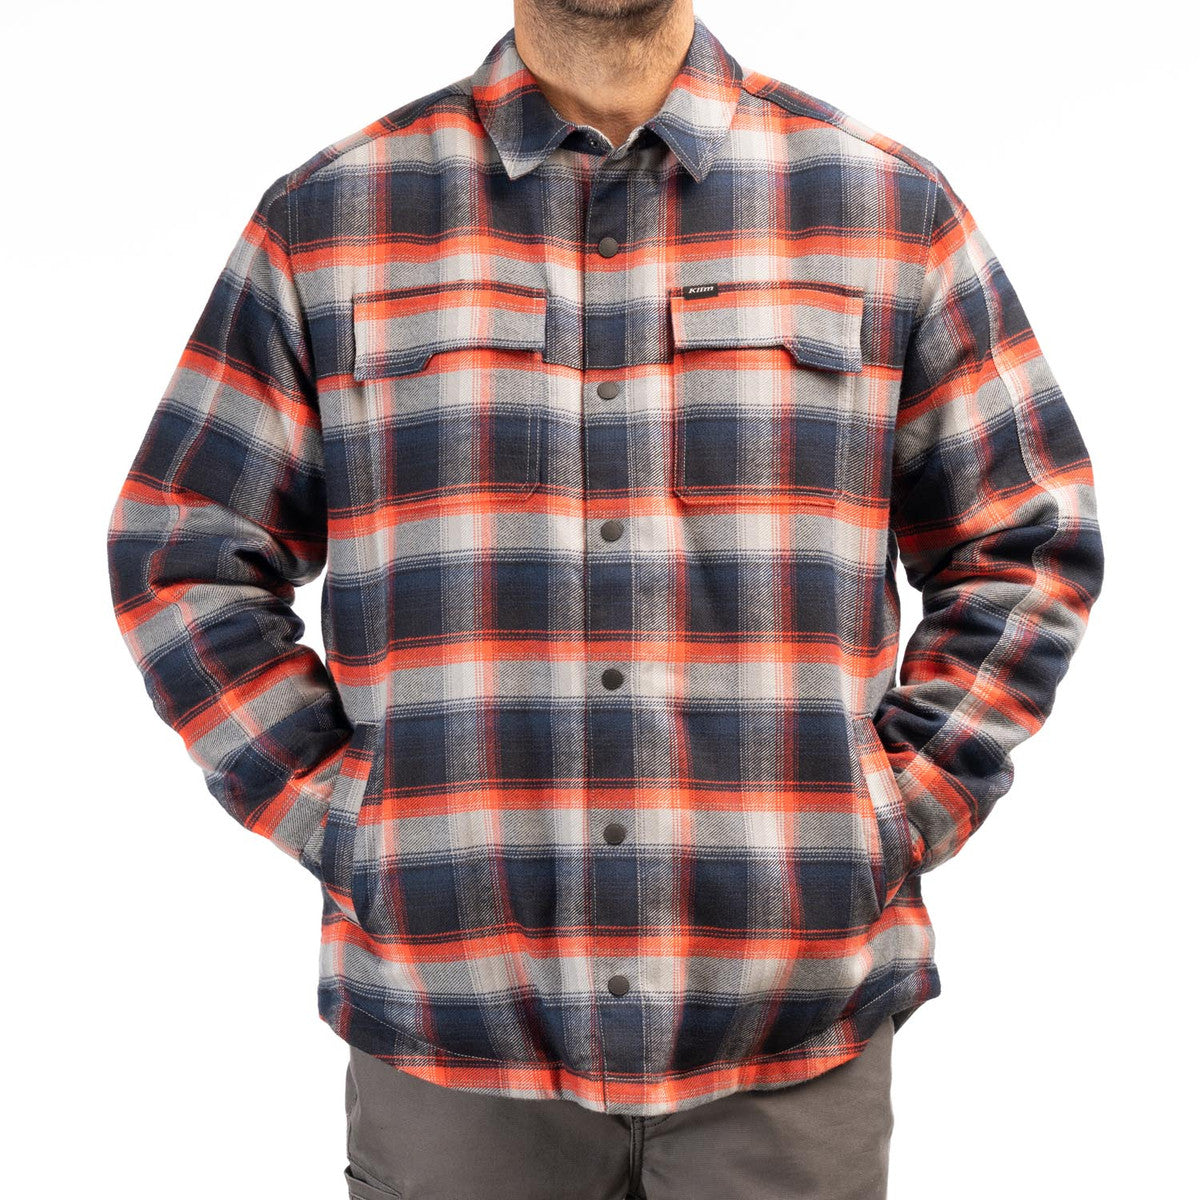 High Pile Fleece Lined Flannel Shirt Jacket with DWR